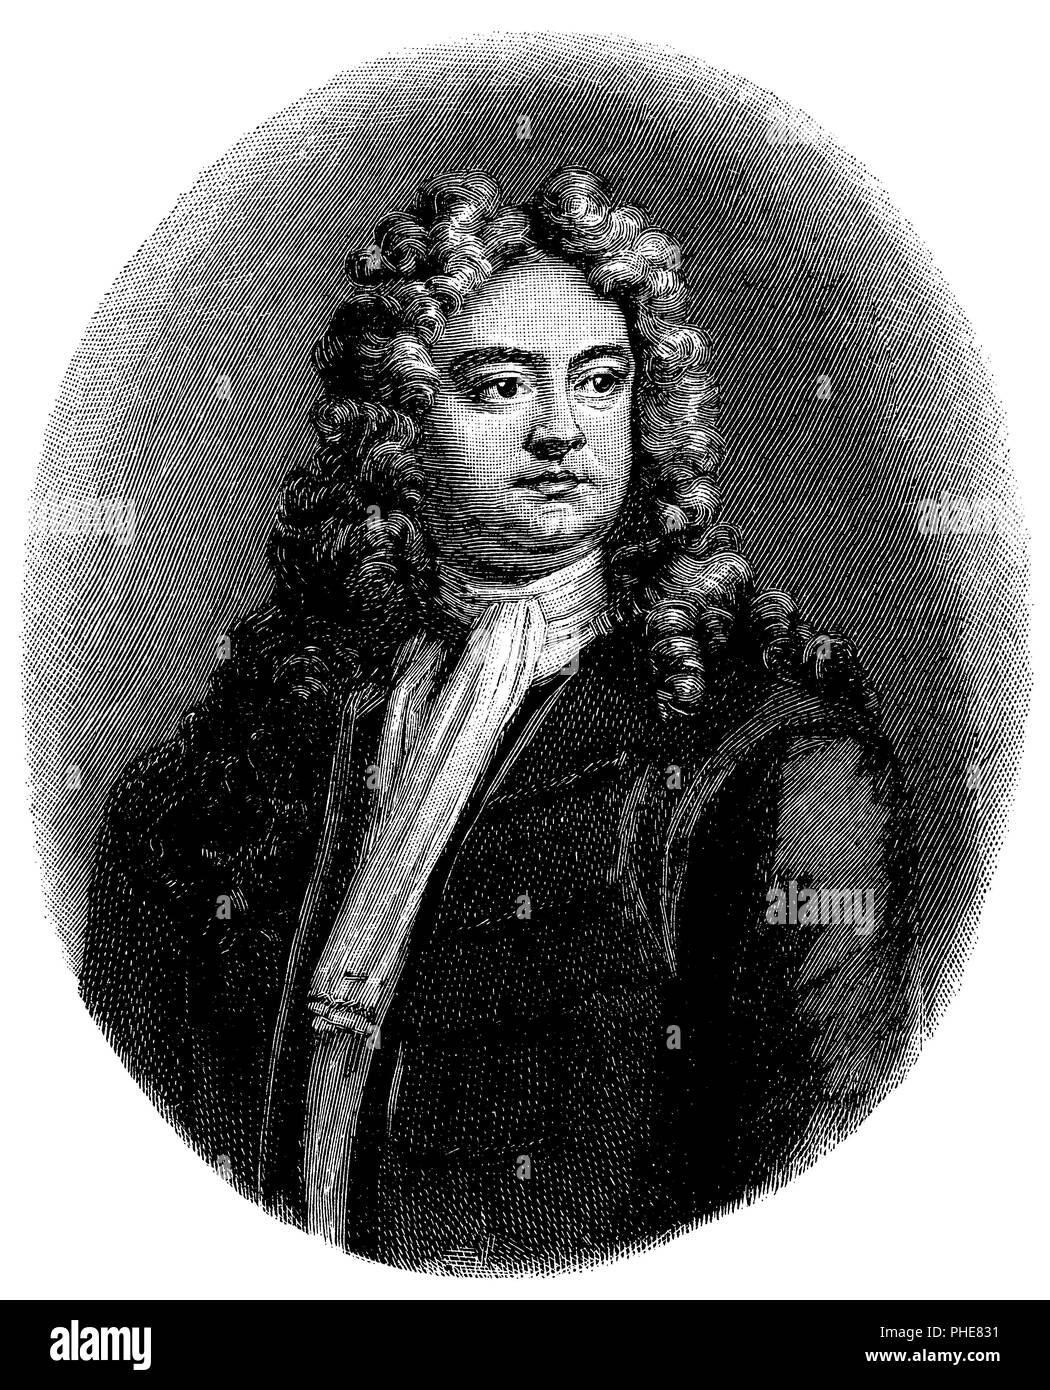 Richard Steele. After the engraving by J. Smith in the British Museum ...